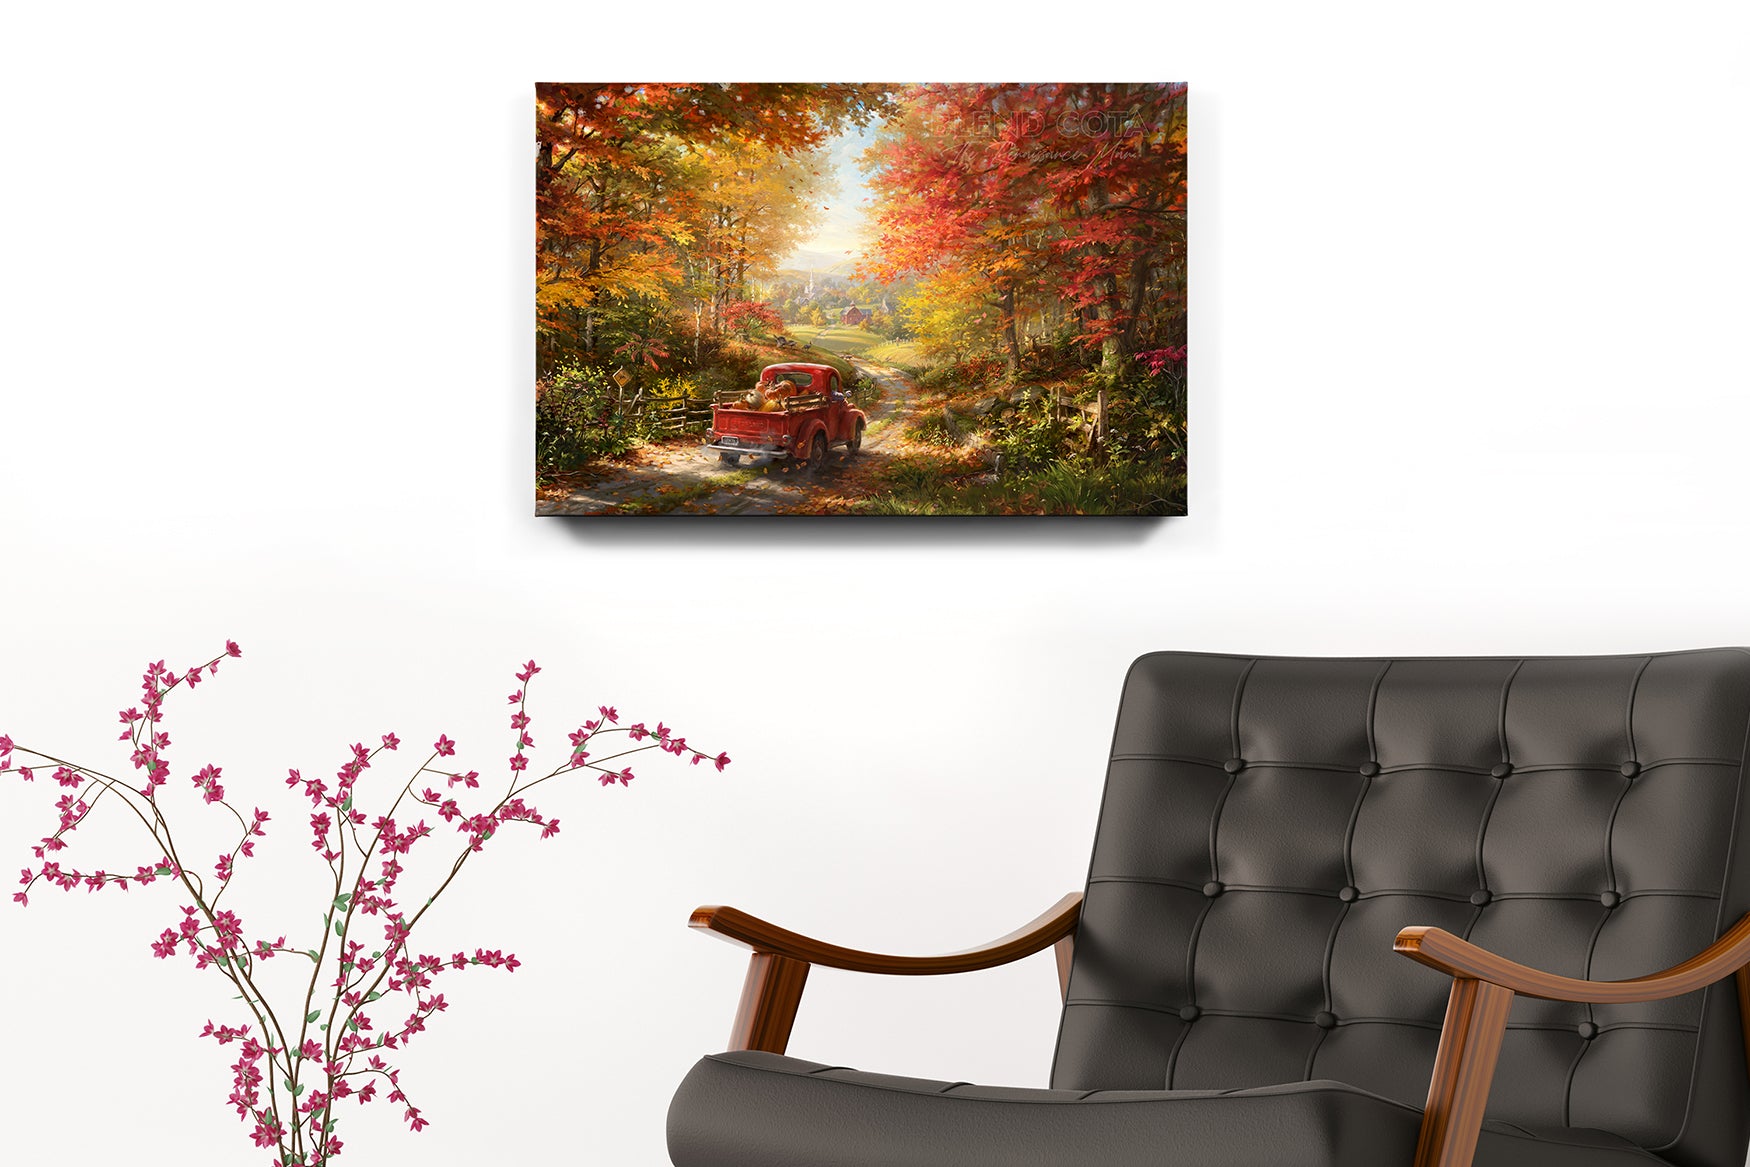 The Place I Belong | Fall Road Autumn Leaves- Blend Cota Art Print on Cardstock - Blend Cota Studios - Studio room with painting on wall